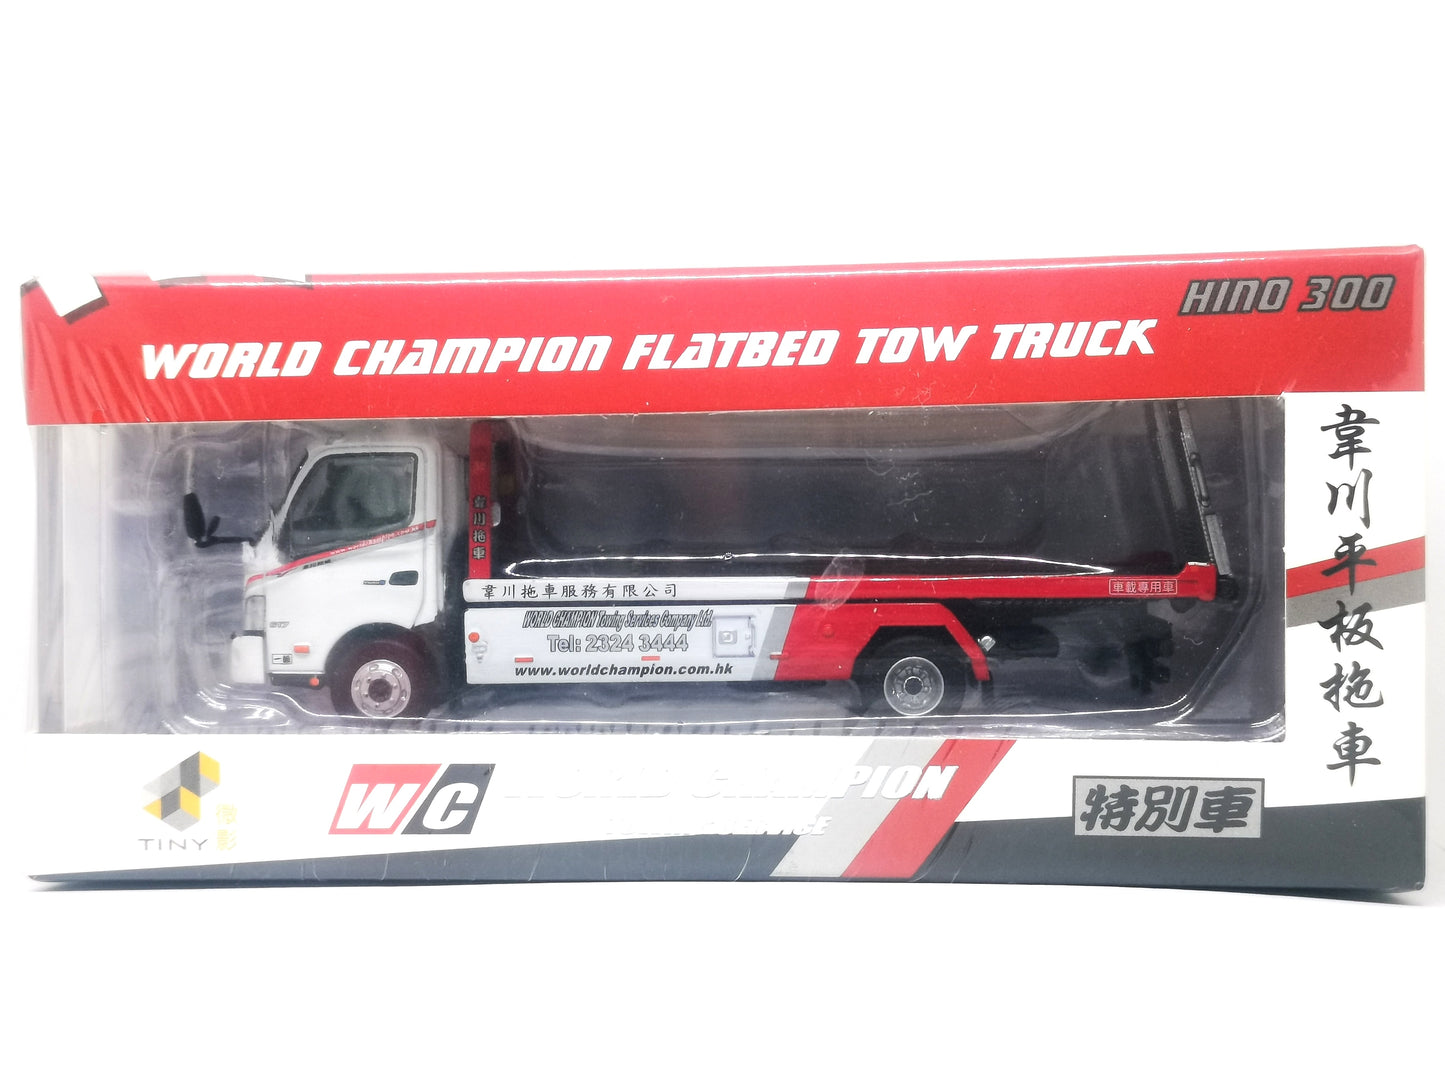 Tiny Hino 300 World Champion Flatbed Tow Truck Special Edition 1:64 Scale